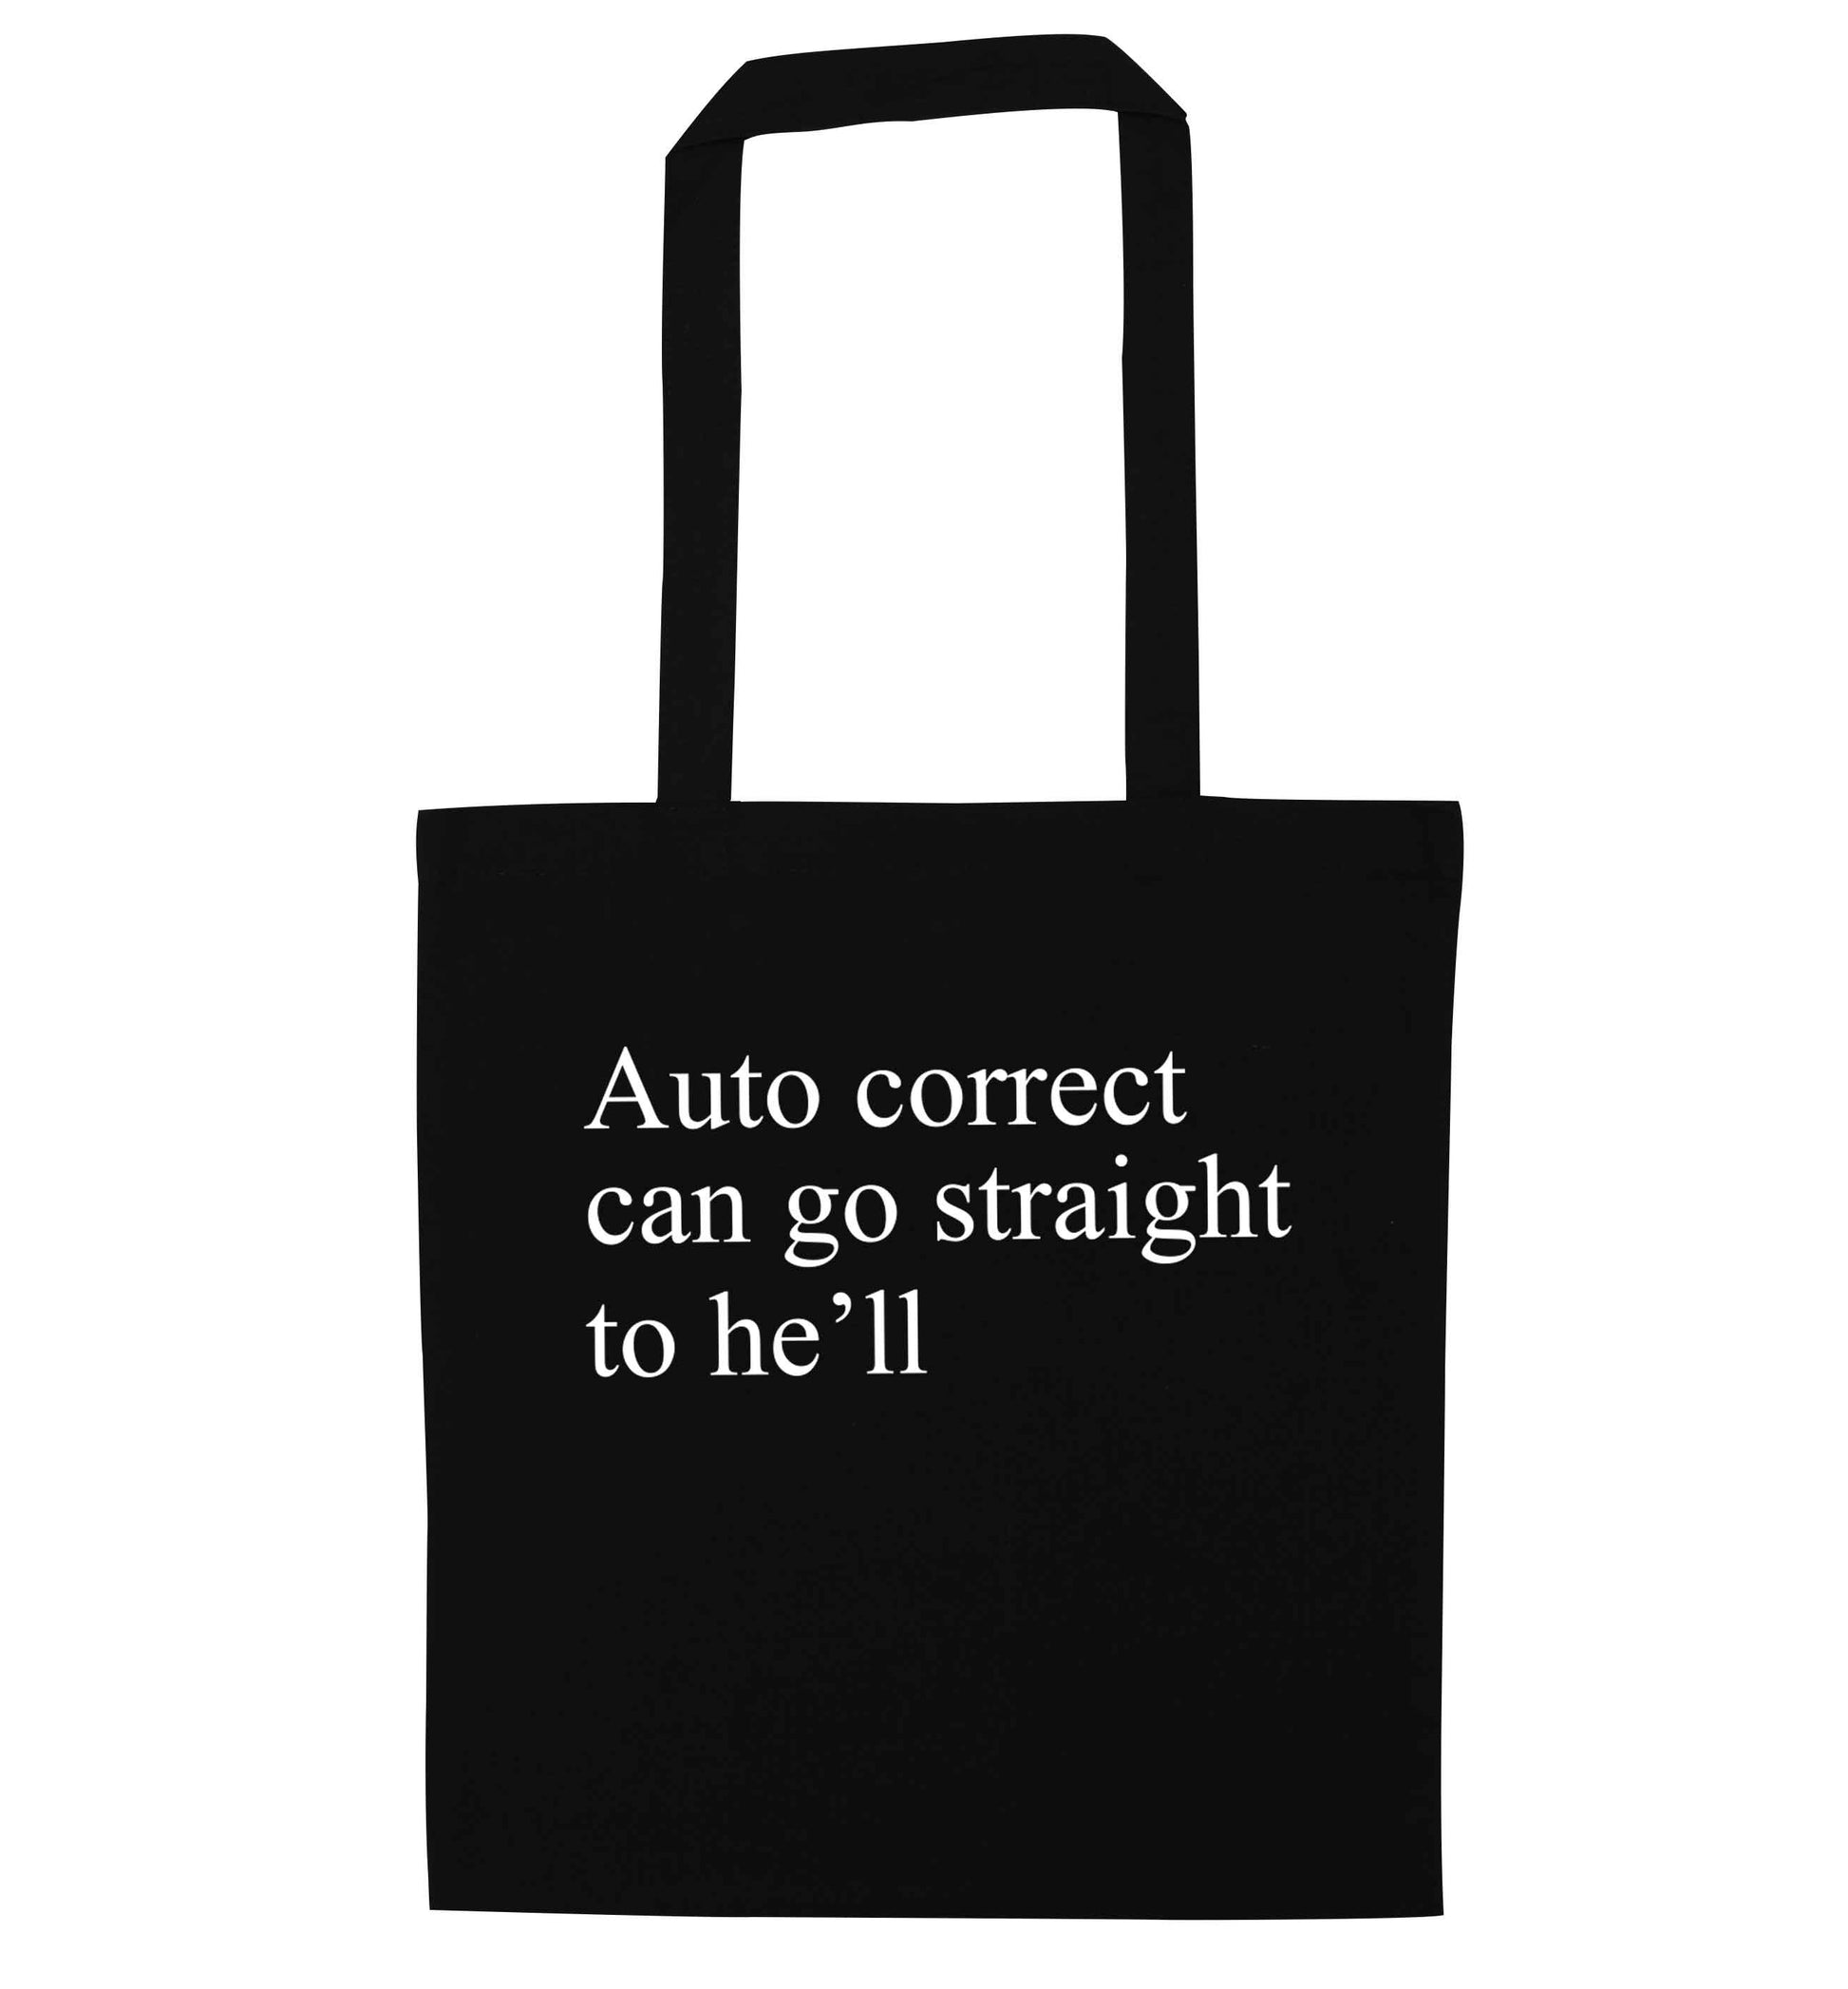 Auto correct can go straight to he'll black tote bag